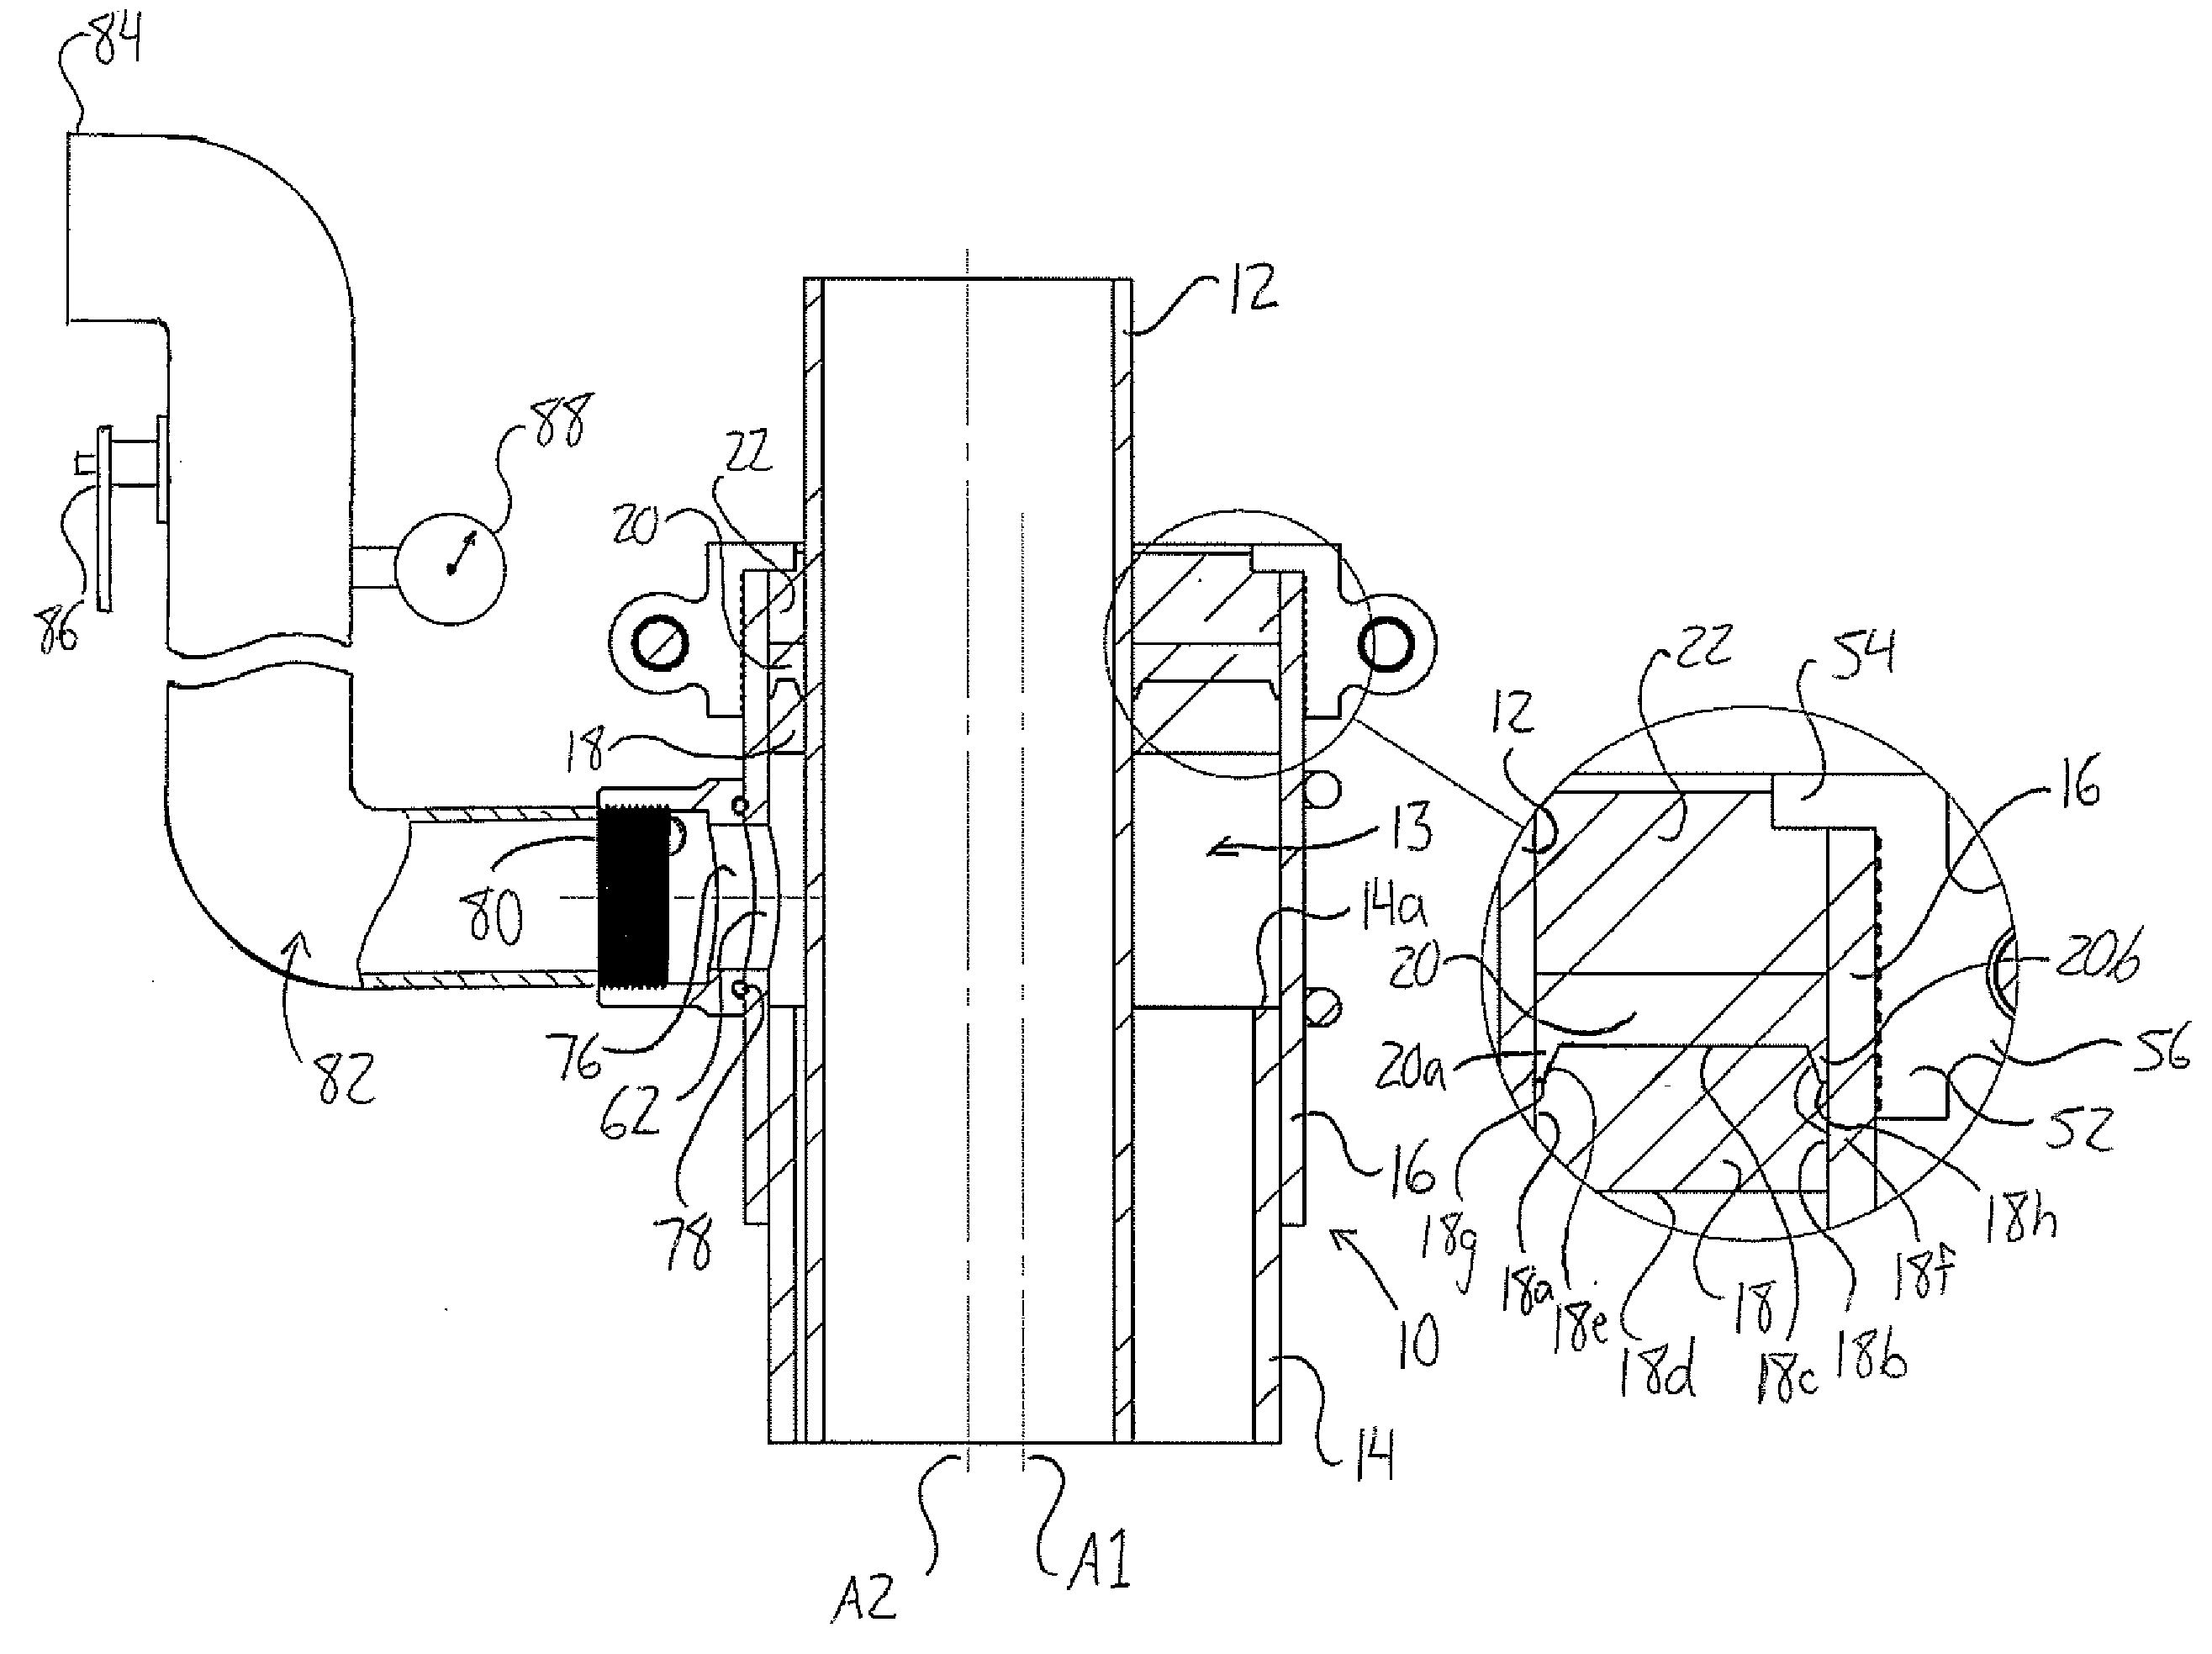 Method of Sealing Annular Space Between Inner and Outer Upright Tubes